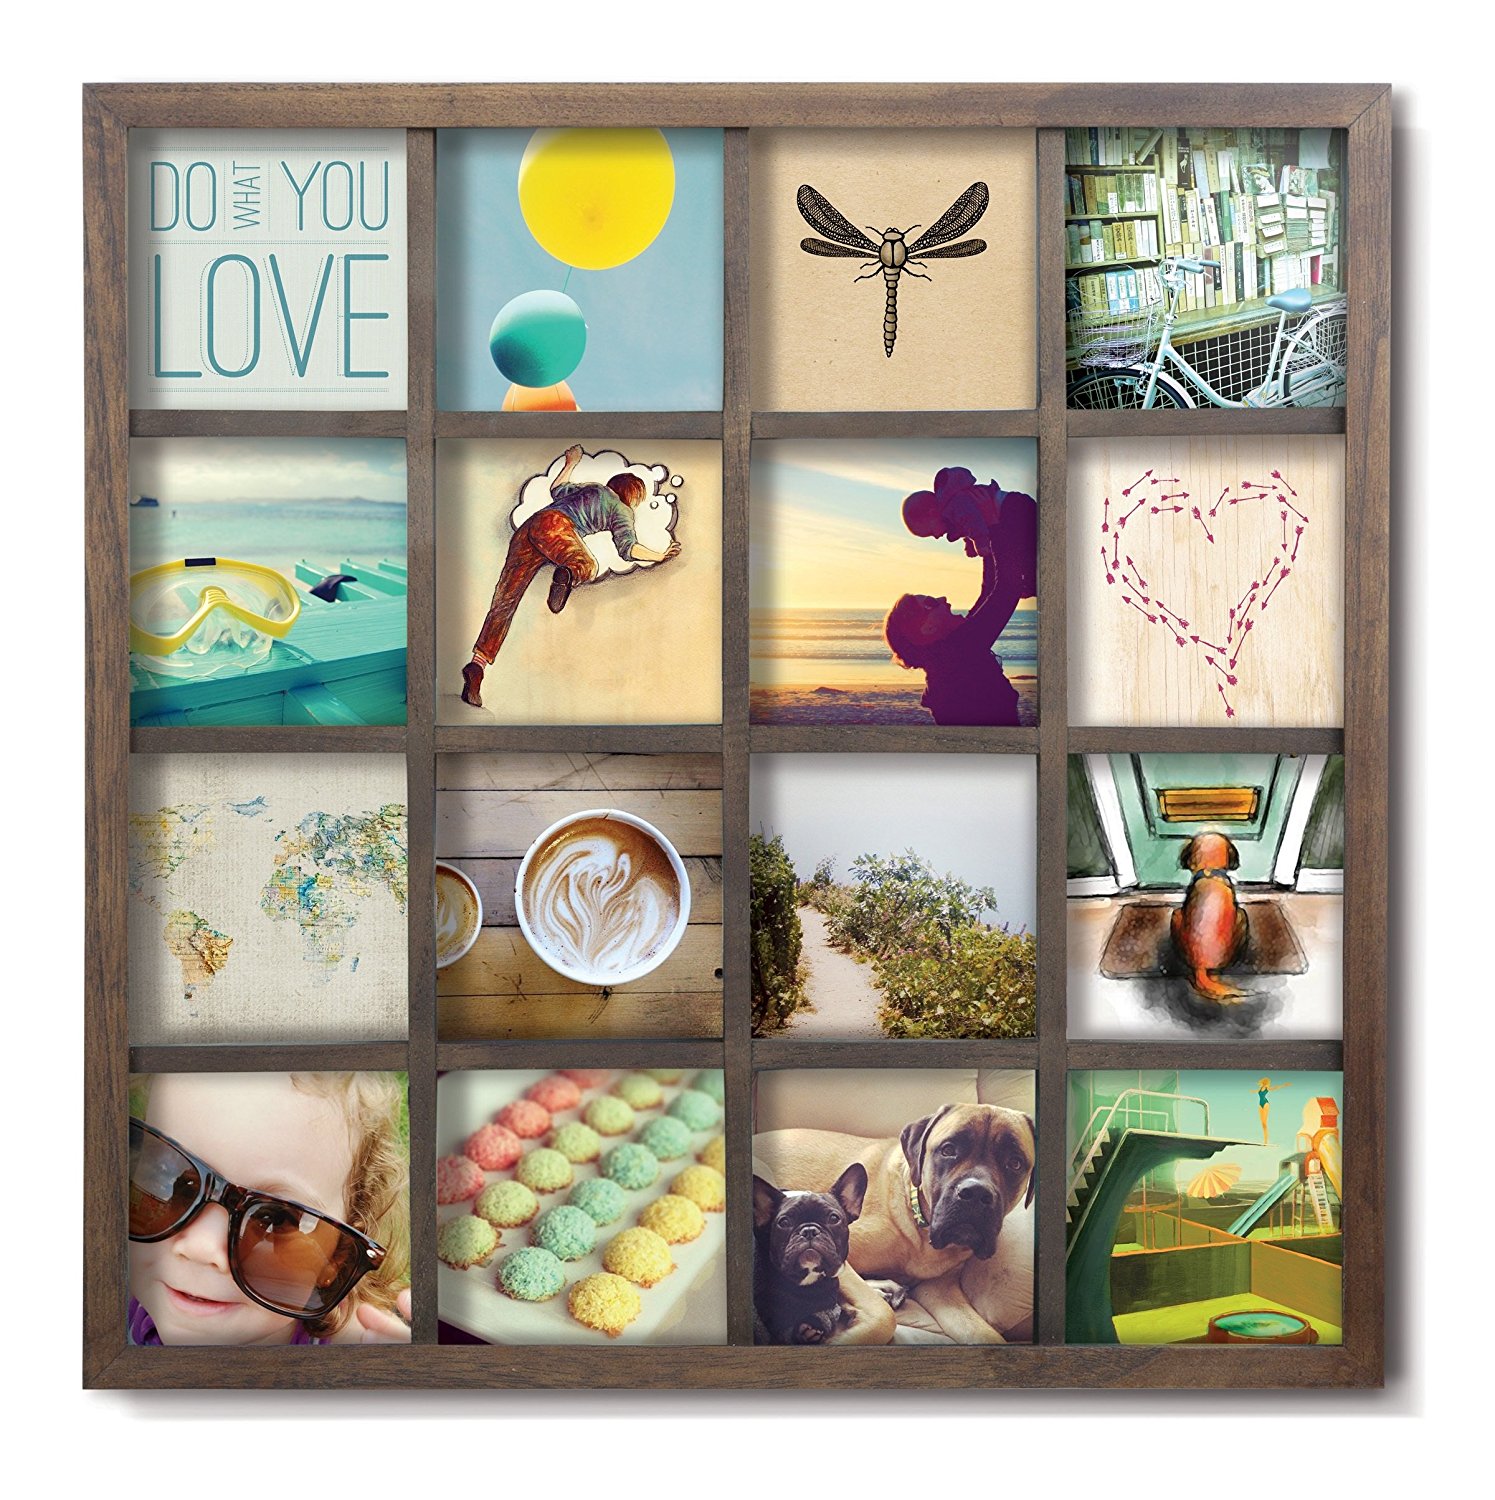 Umbra Gridart 4x4 Picture Frame – DIY Gallery Style Multi Picture Photo Collage Frame, Displays 16 Square 4 by 4 inch Photos, Illustrations, Art, Graphic Text & More, Walnut